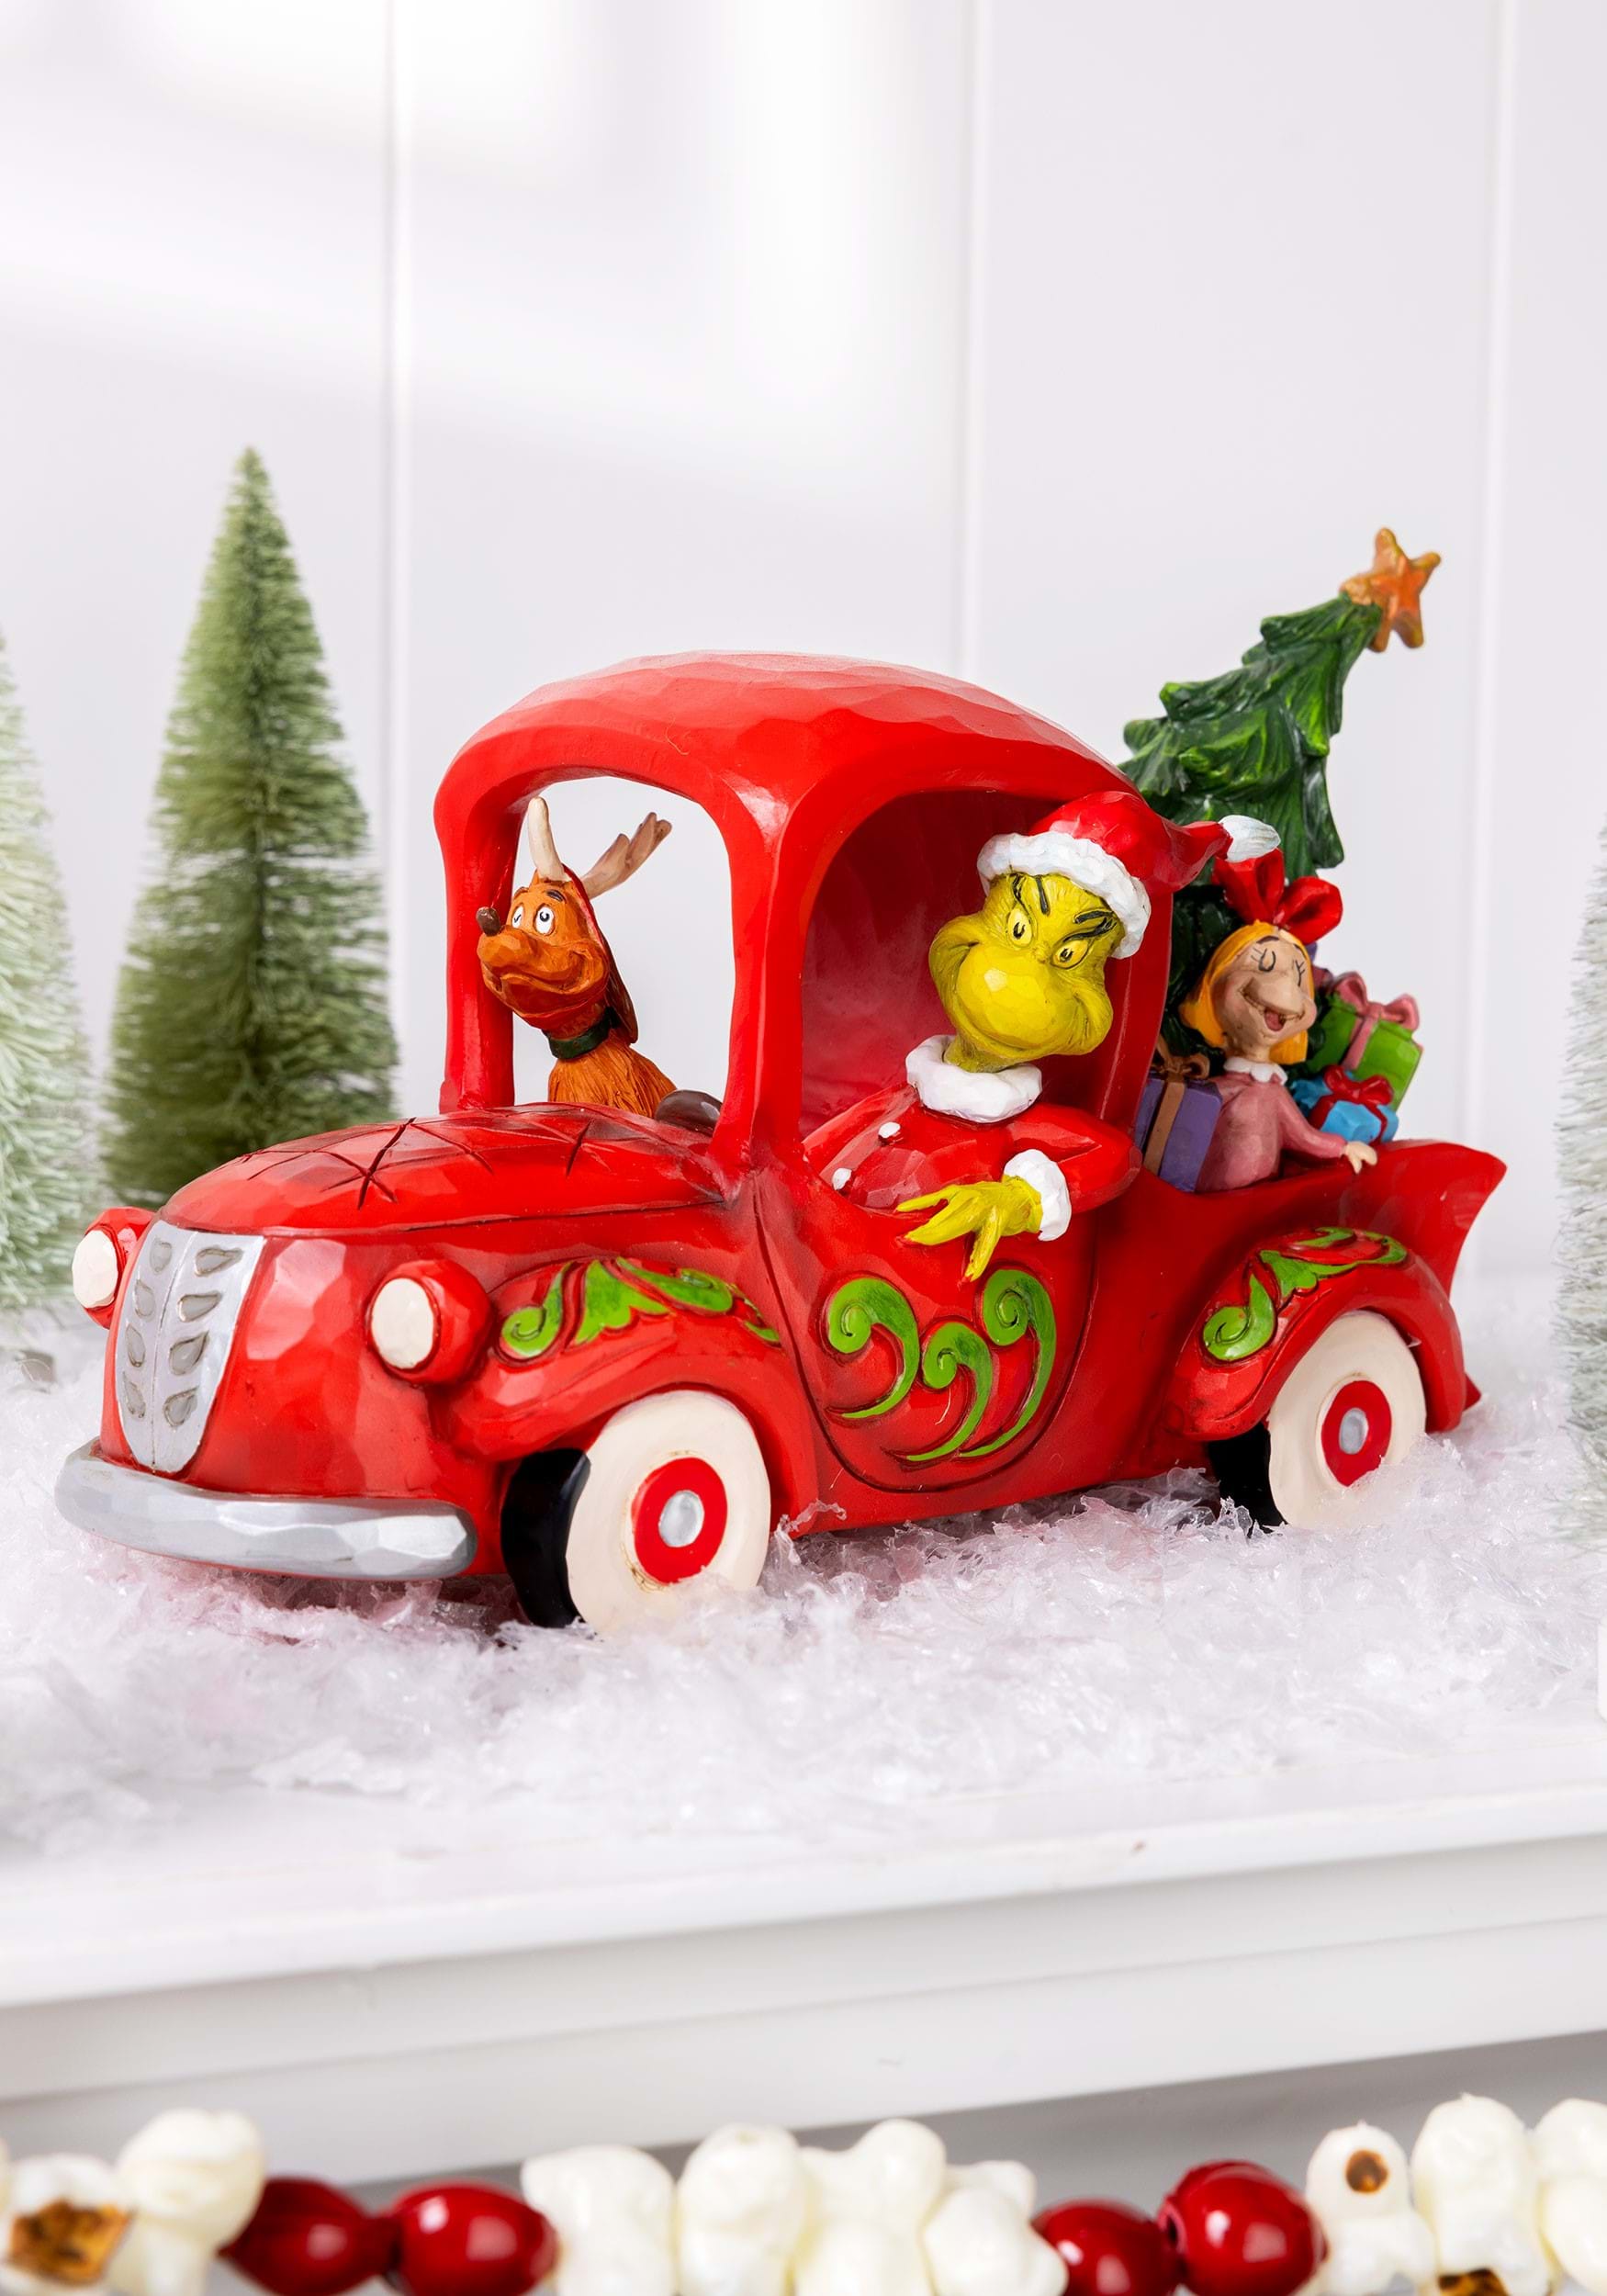 https://images.fun.com/products/82061/1-1/jim-shore-grinch-with-friends-in-truck-statue.jpg